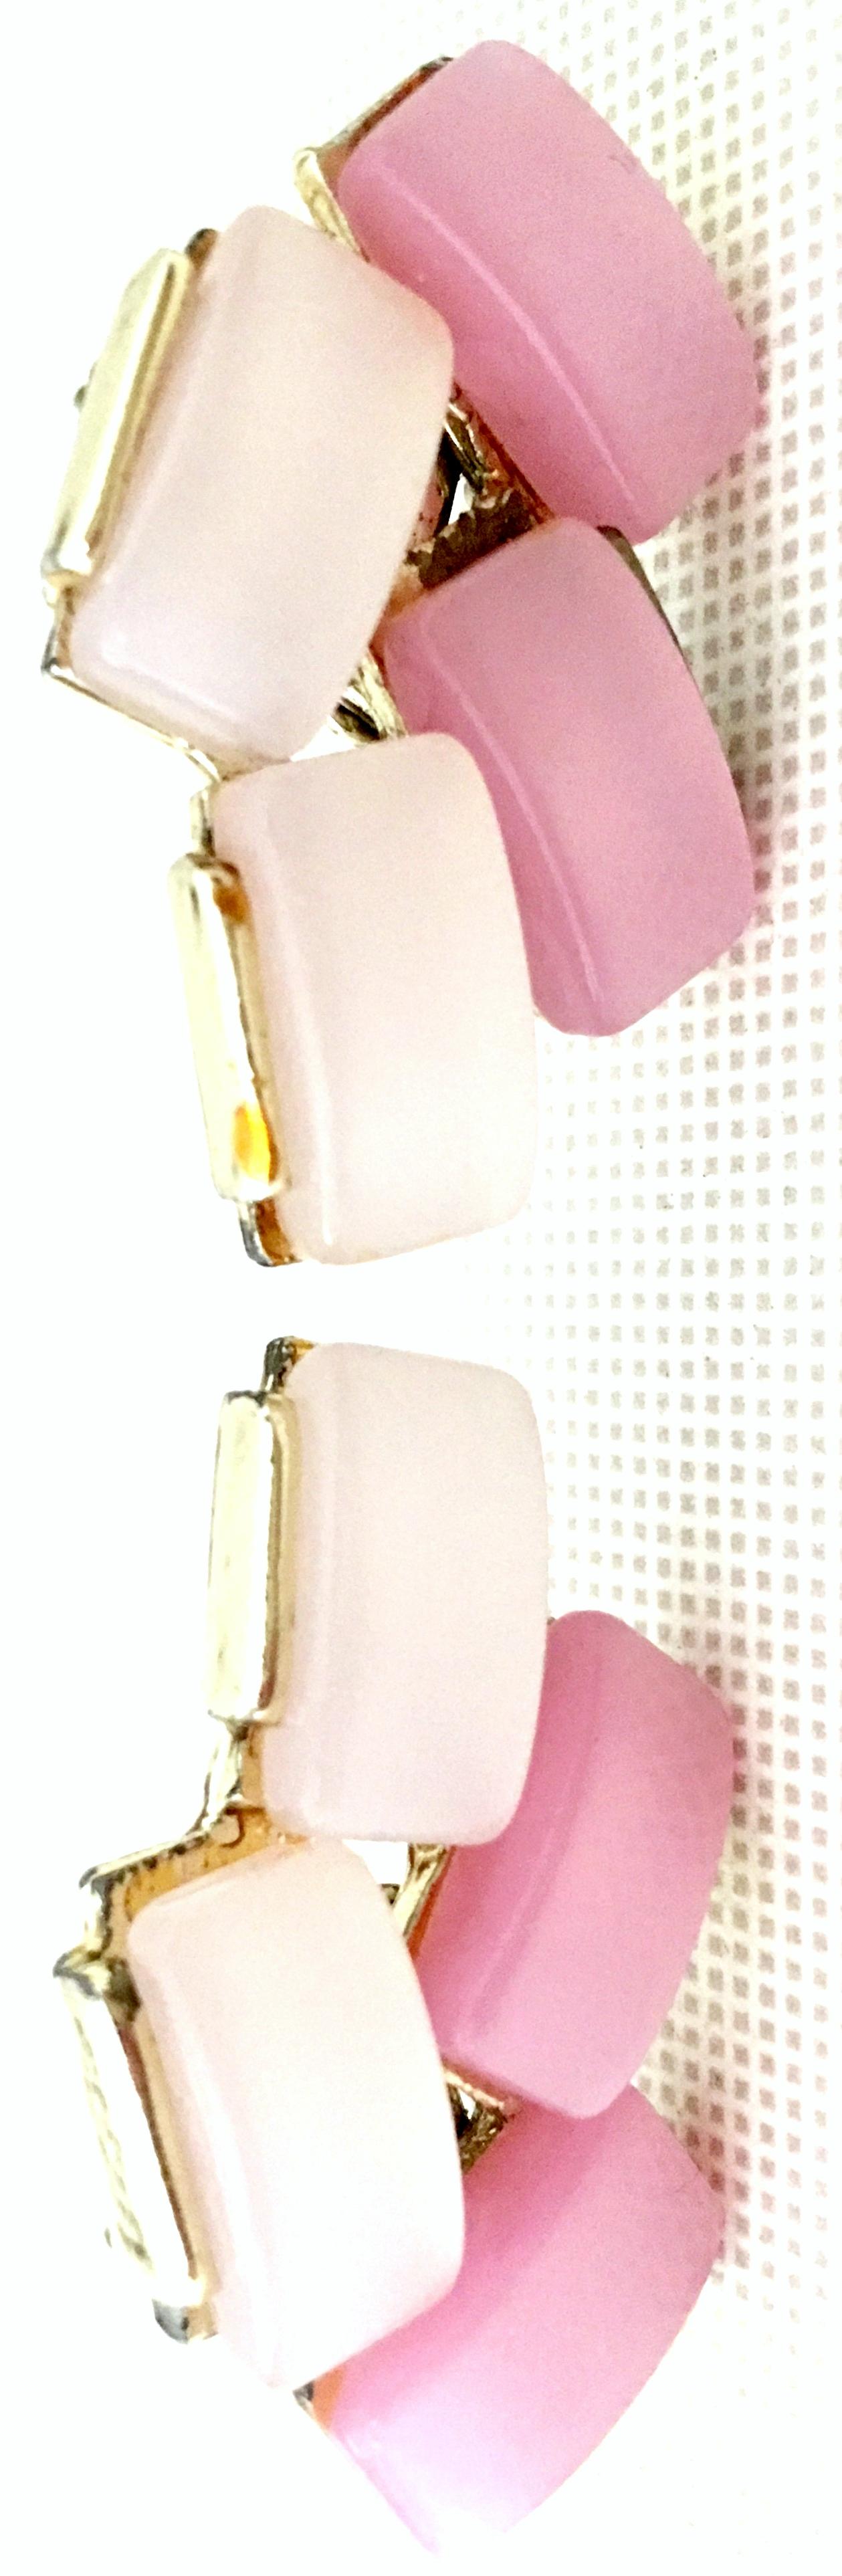 20th Century Pair Of Pink Lucite & Silver Earrings by Coro For Sale 4